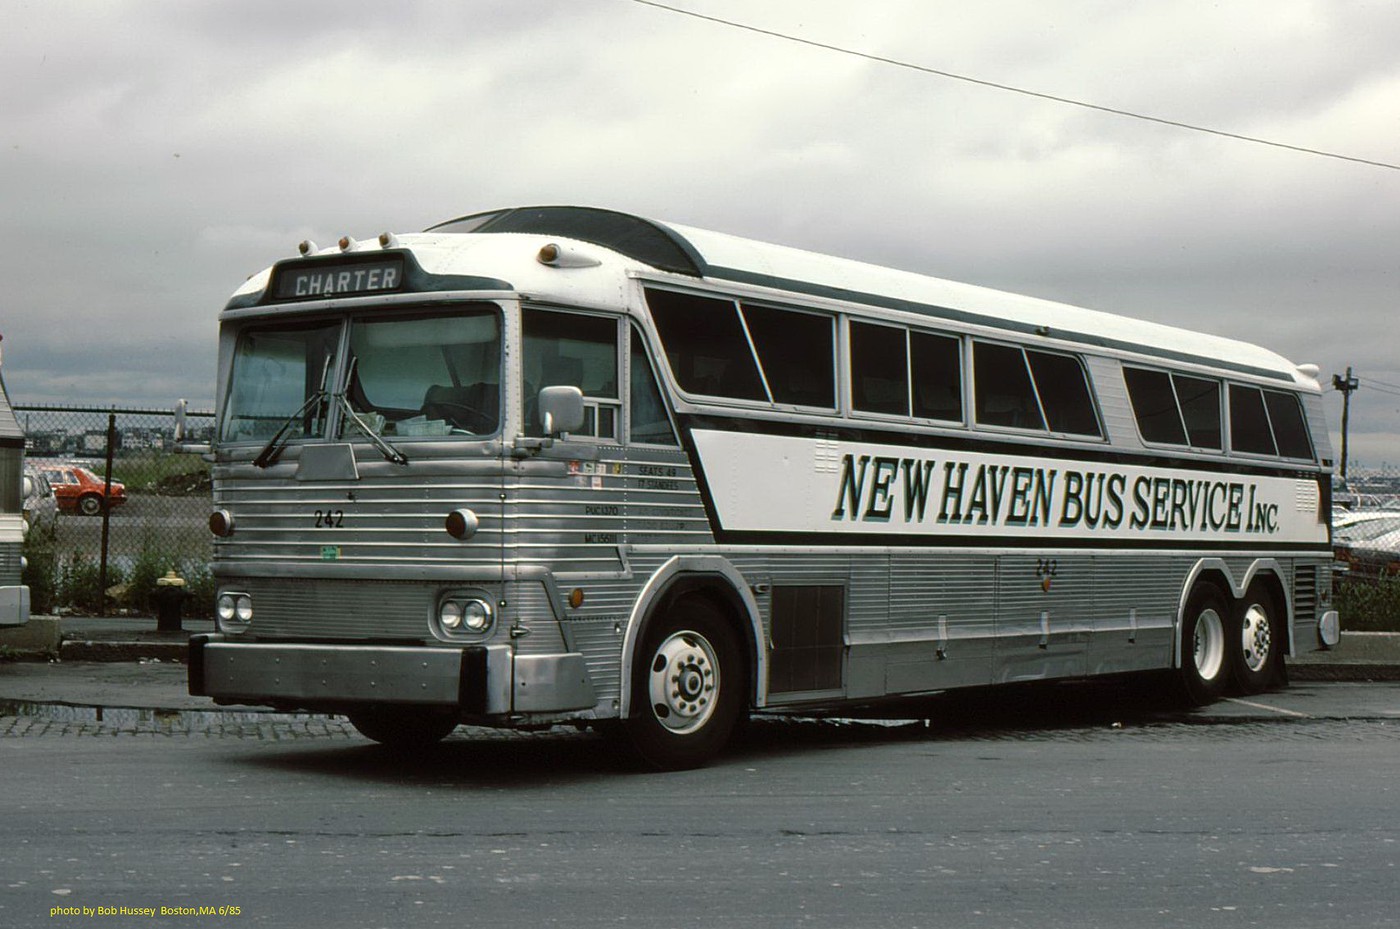 New Haven Bus album | Esbdave | Fotki.com, photo and video sharing made